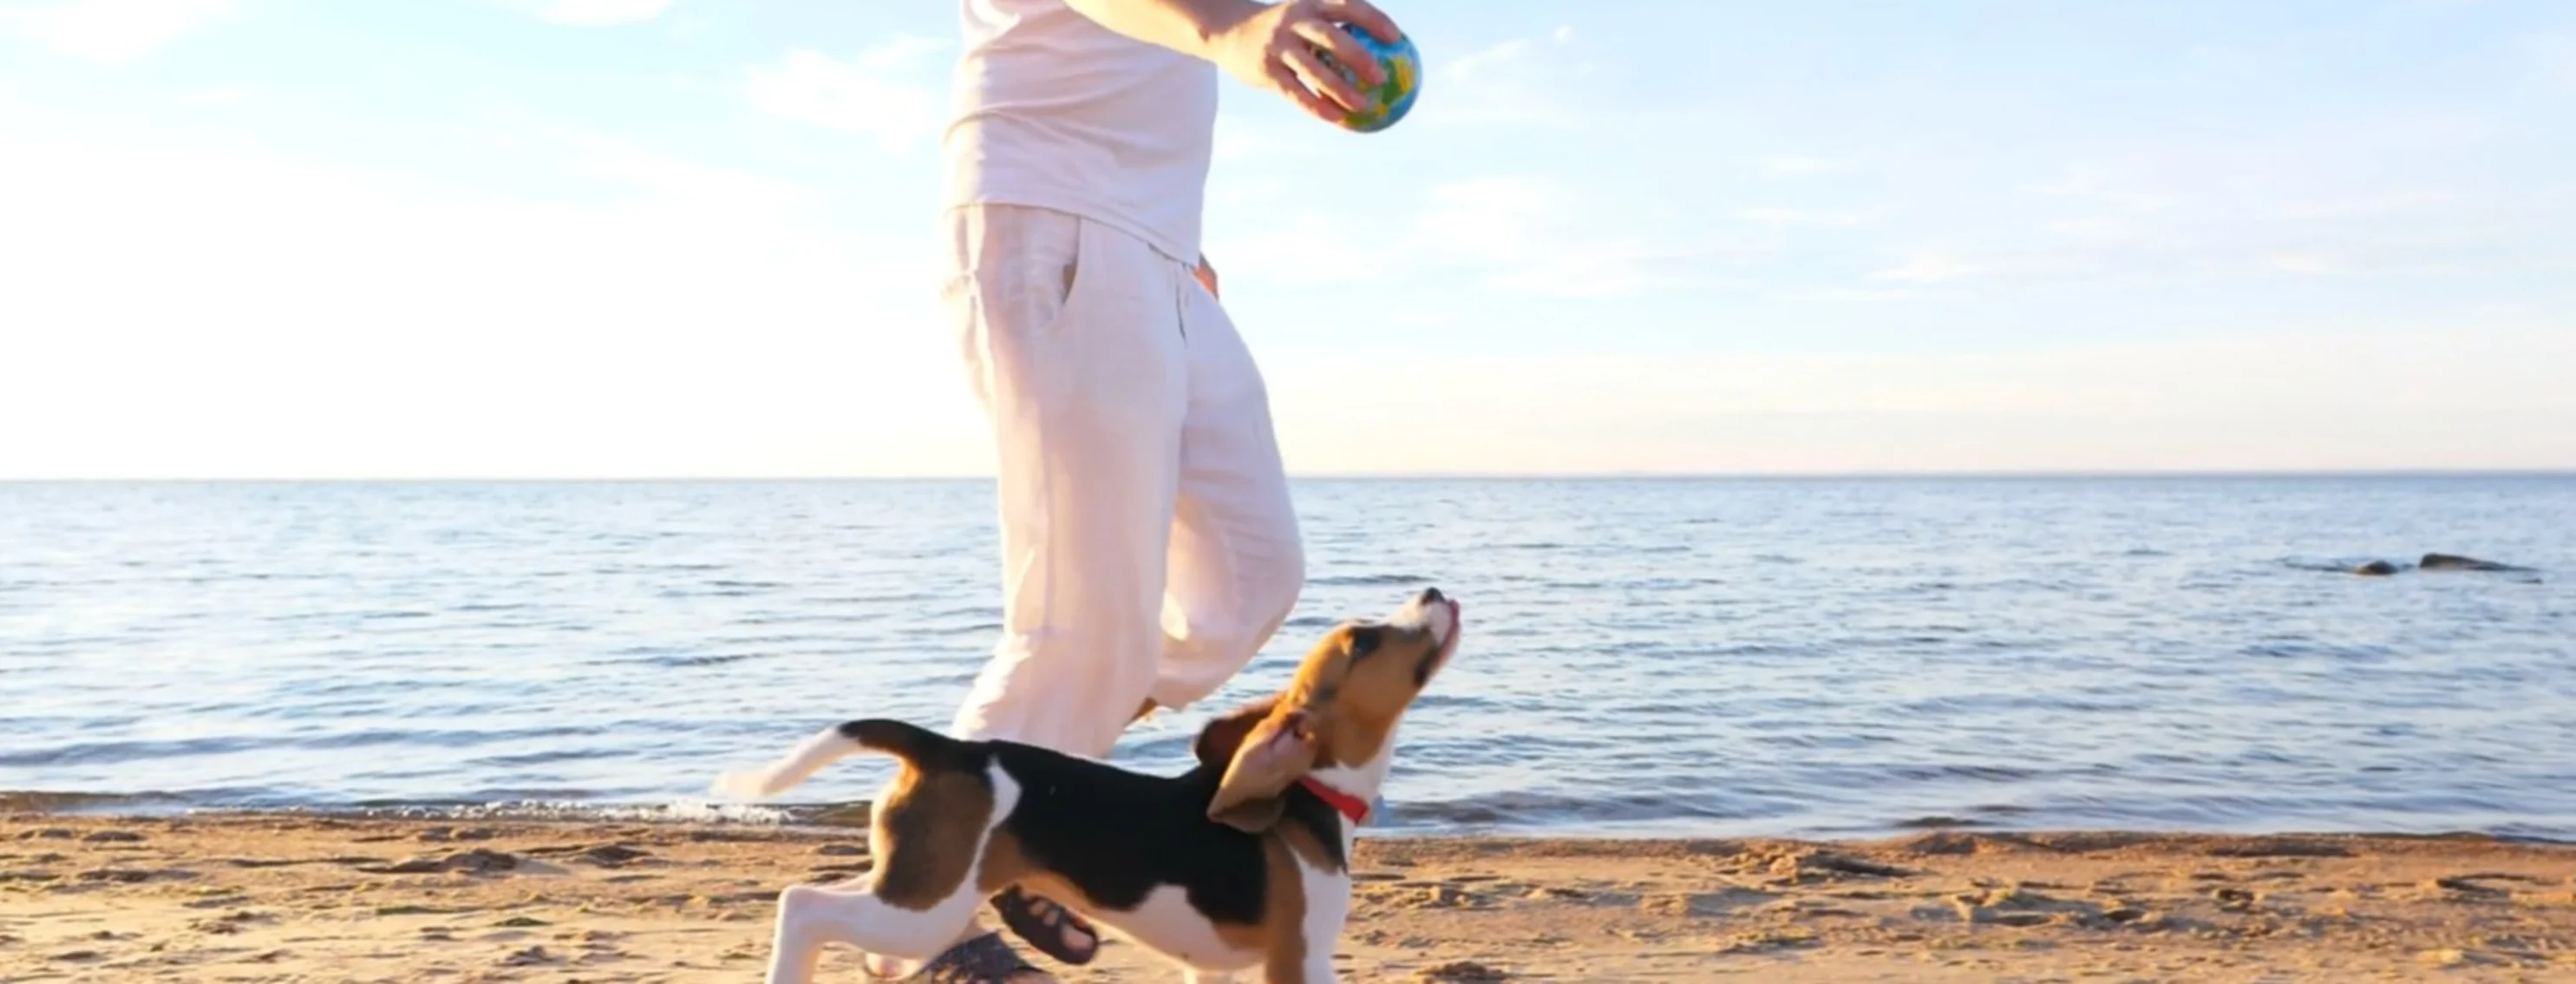 A dog running on the beach with a person holding a ball